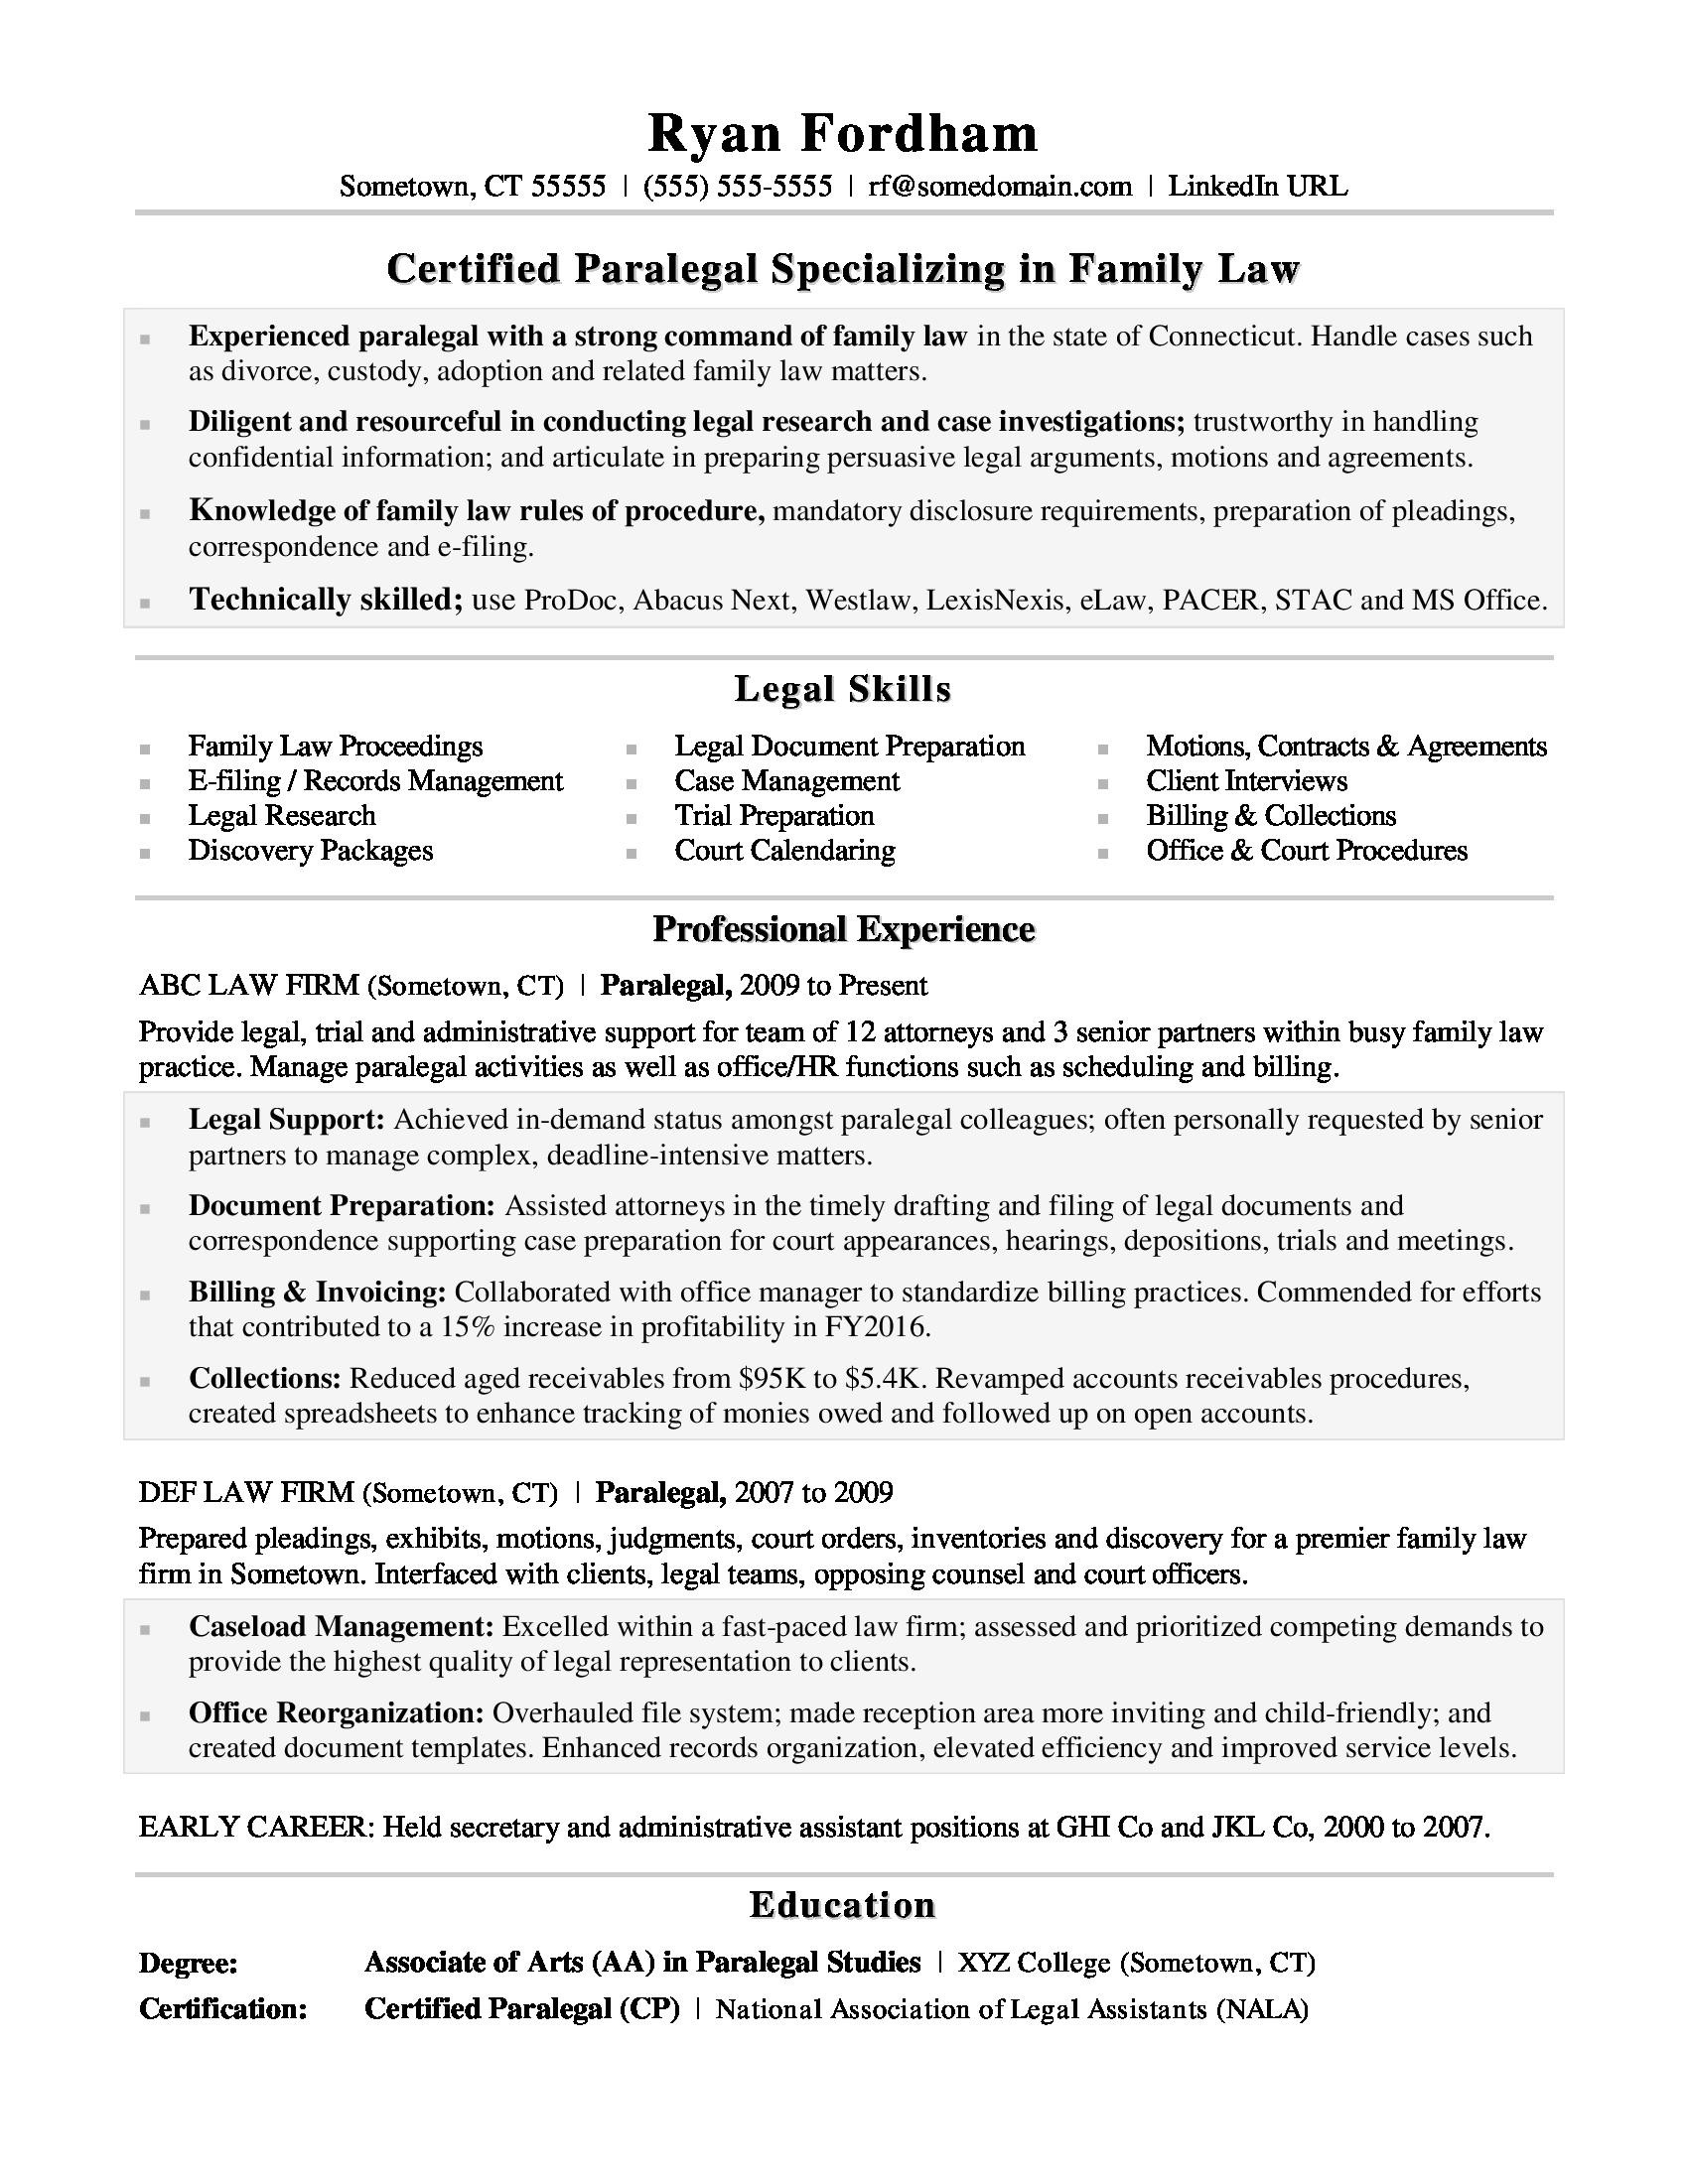 Professional Family Owned Resume Summary Sample Paralegal Resume Sample Monster.com